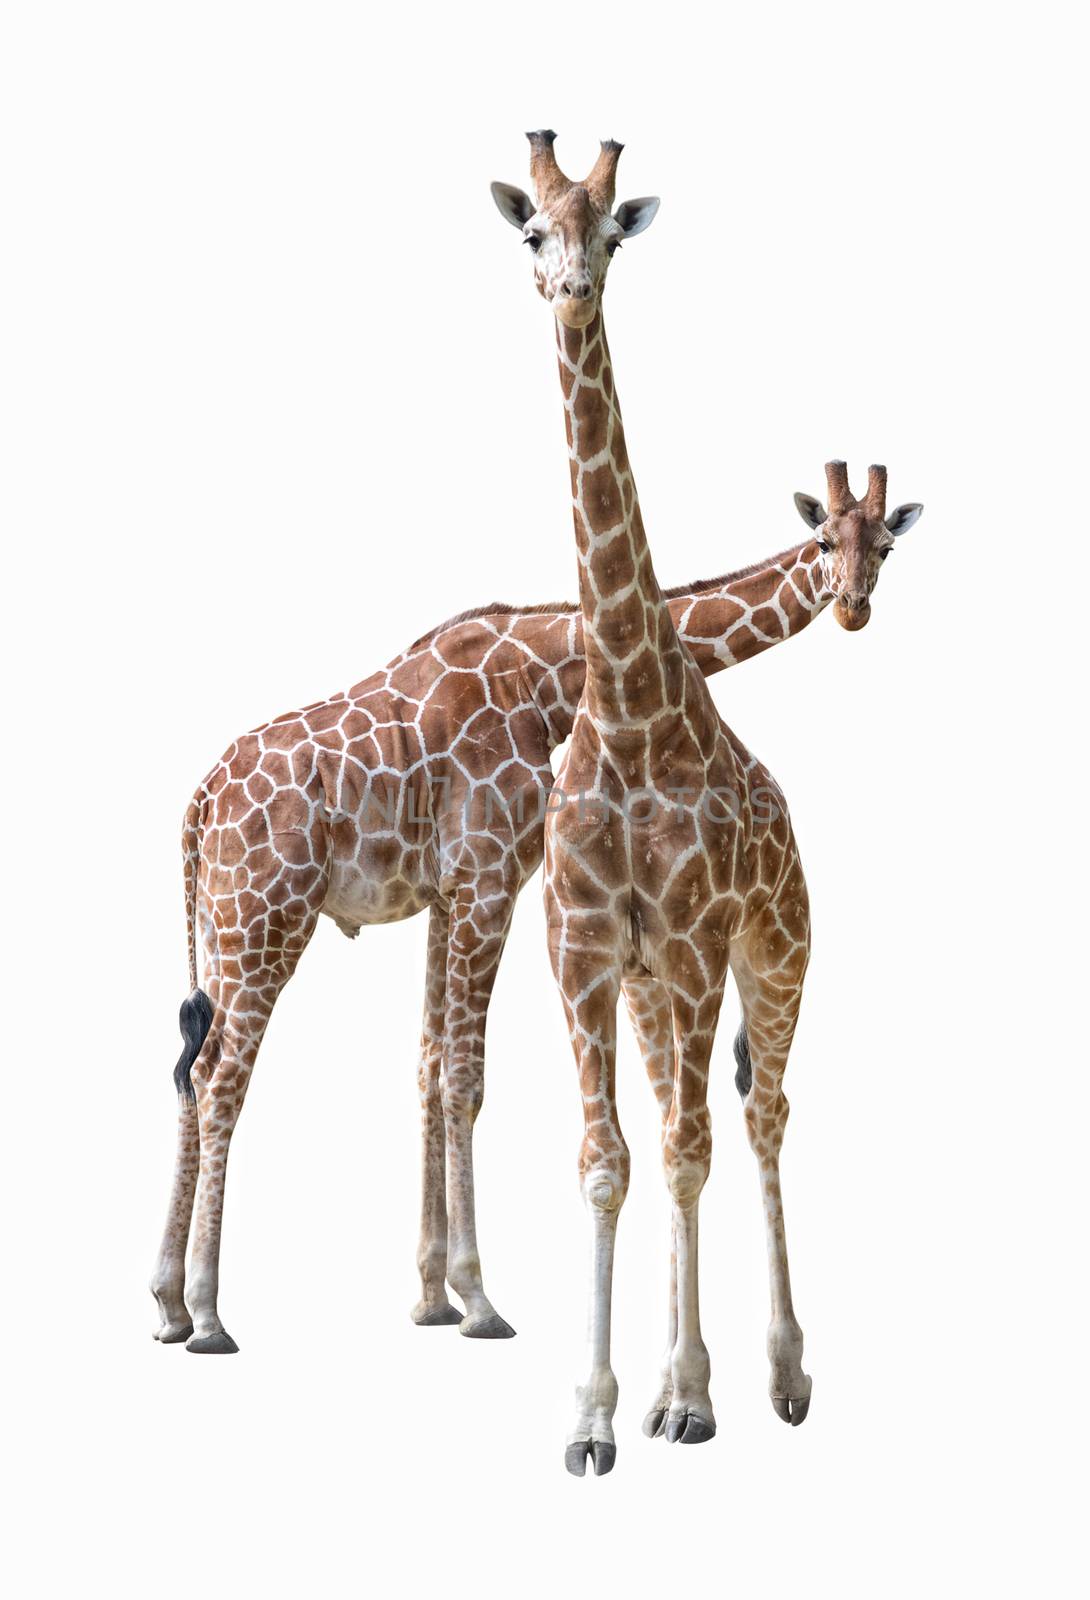 Pair of young giraffe isolated on white background